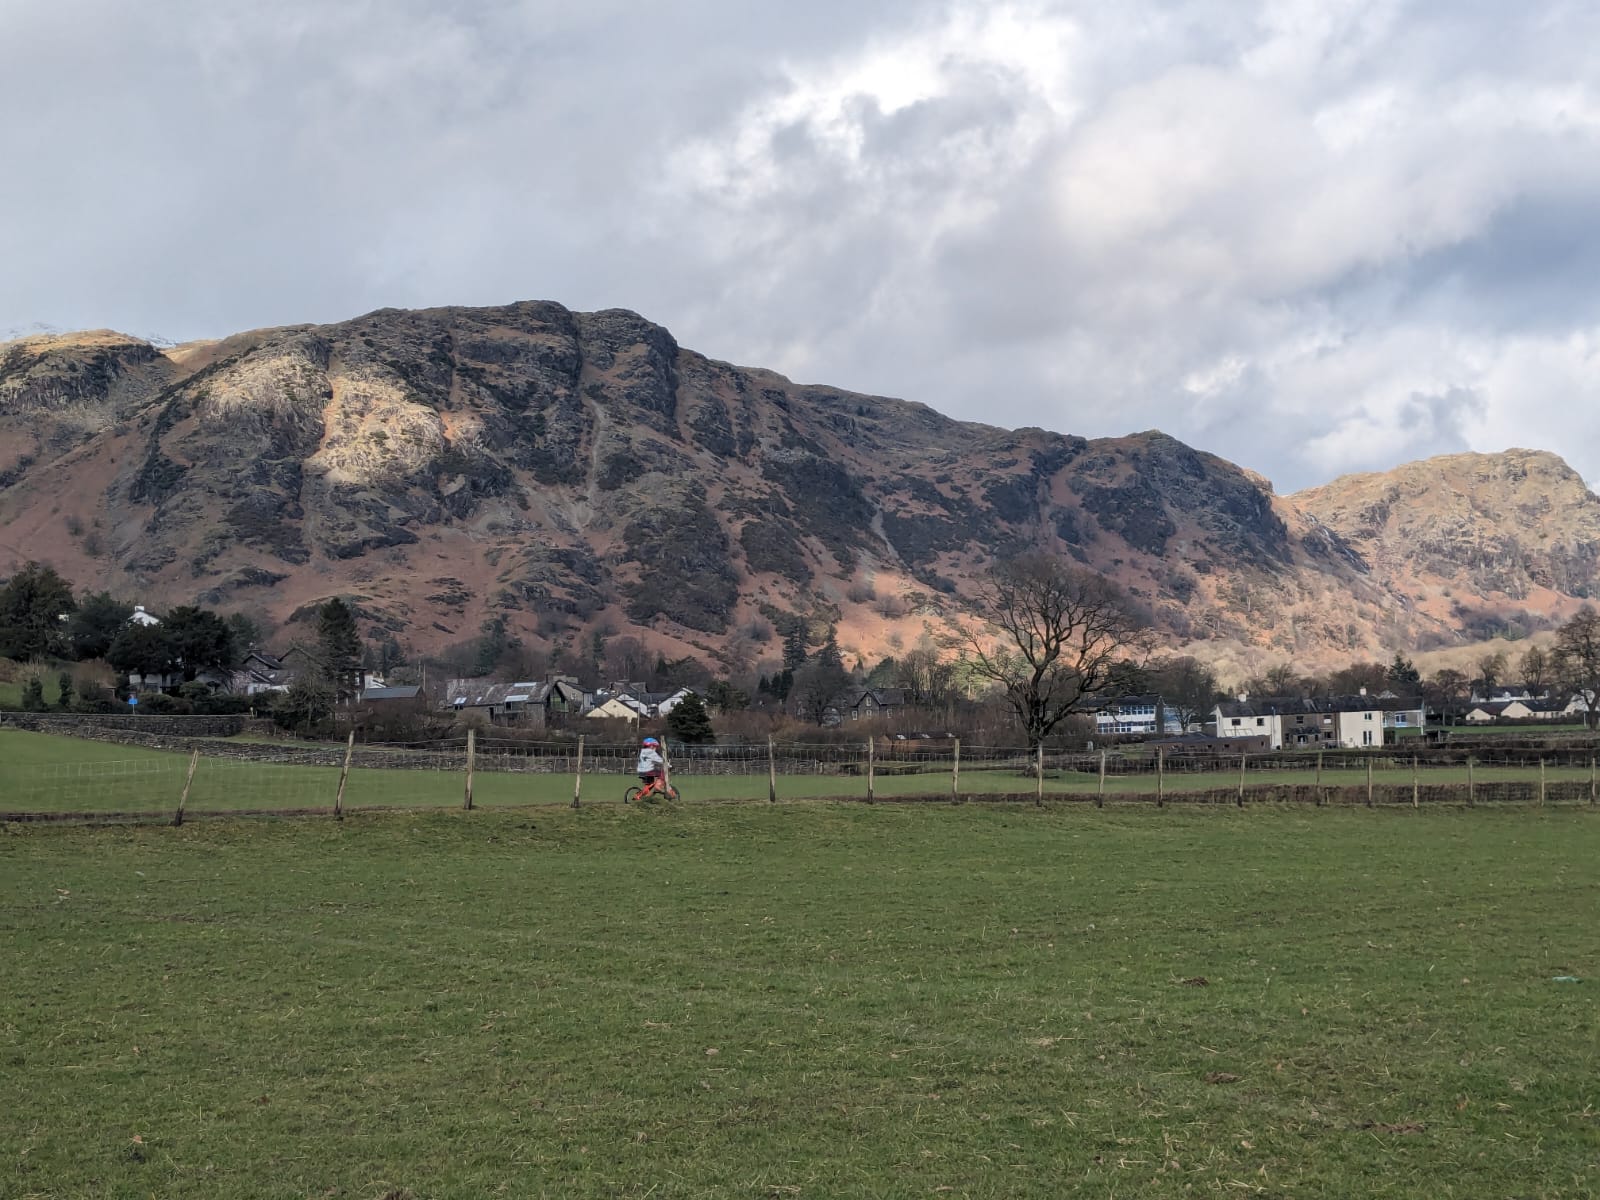 coniston mountains in the background of a child riding his bike